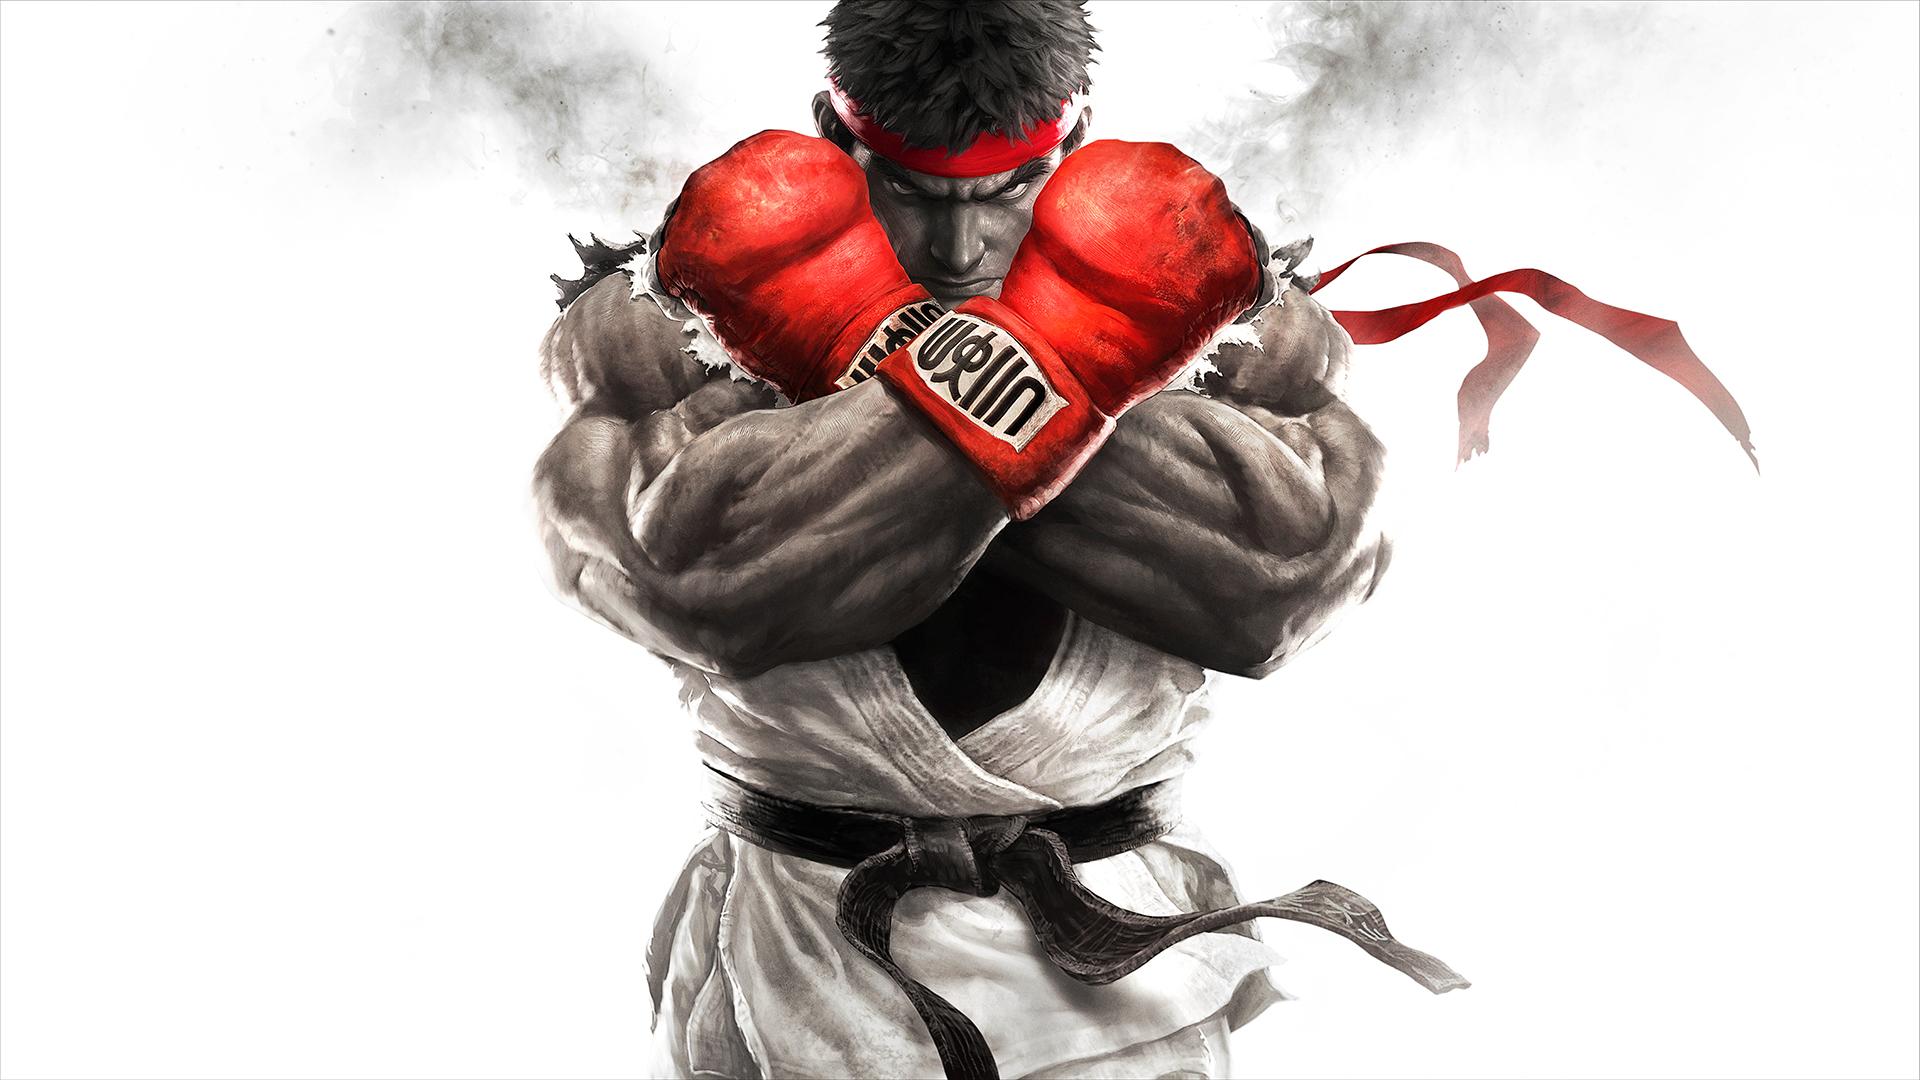 Streetfighter V - Expanalysis - The Game Is Never Over